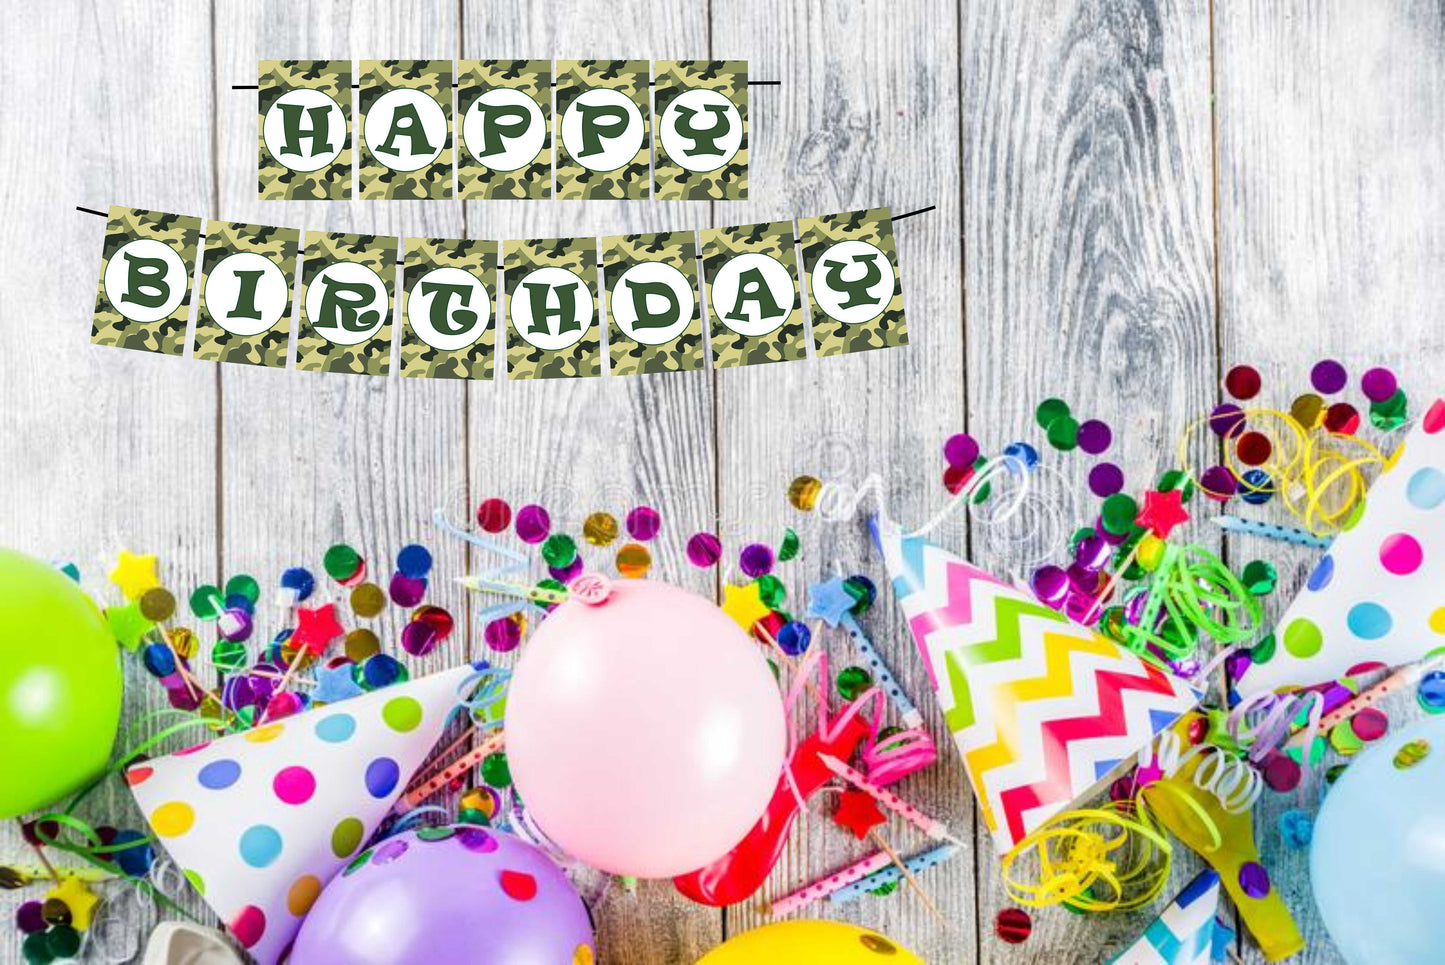 Camo Military Theme Happy Birthday Decoration Hanging and Banner for Photo Shoot Backdrop and Theme Party